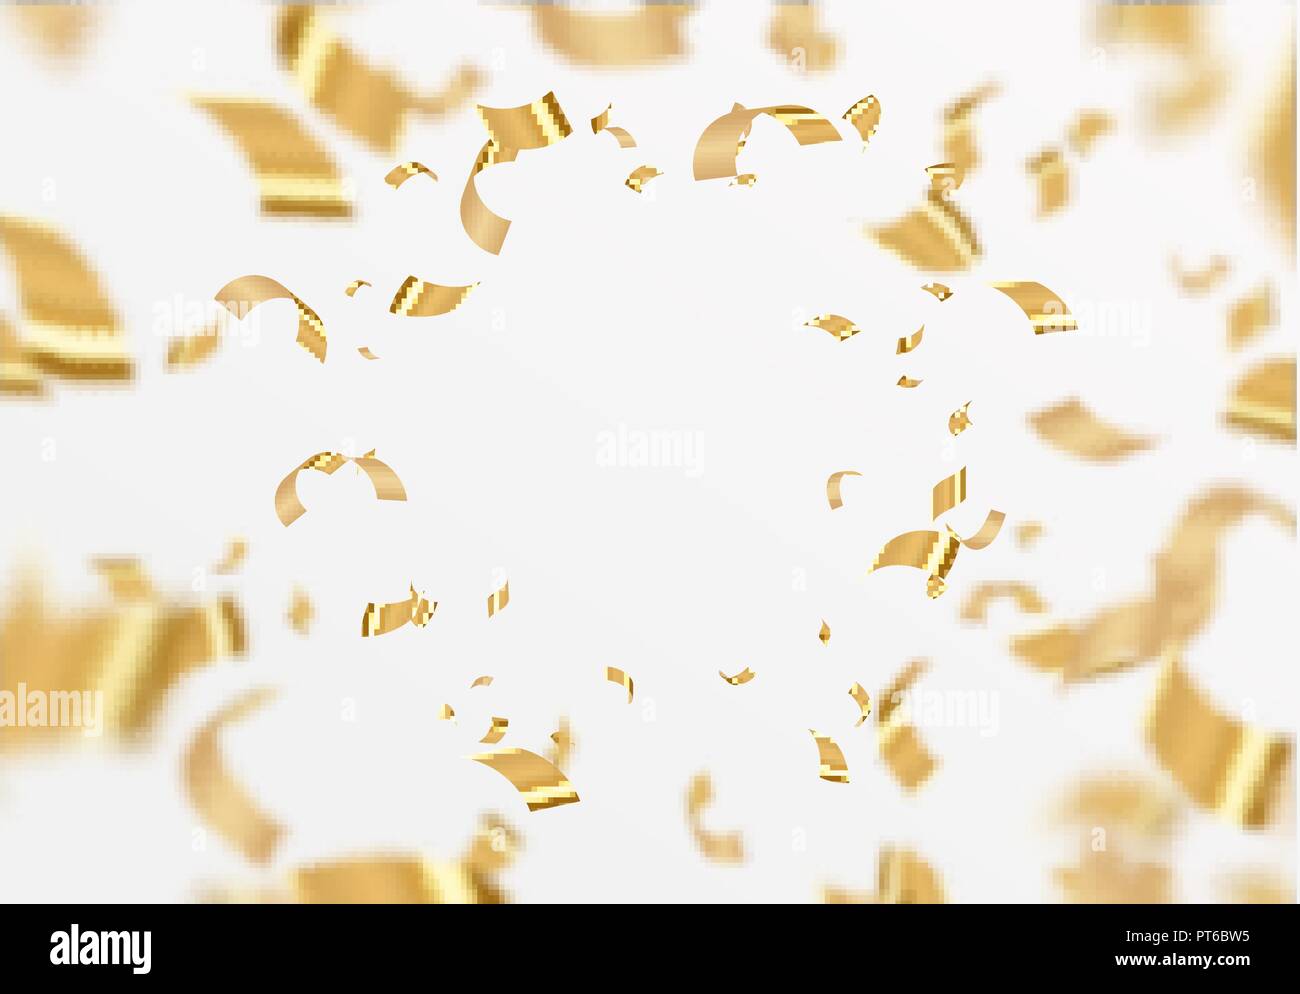 Golden confetti background. Sparkling and shiny tinsel decoration